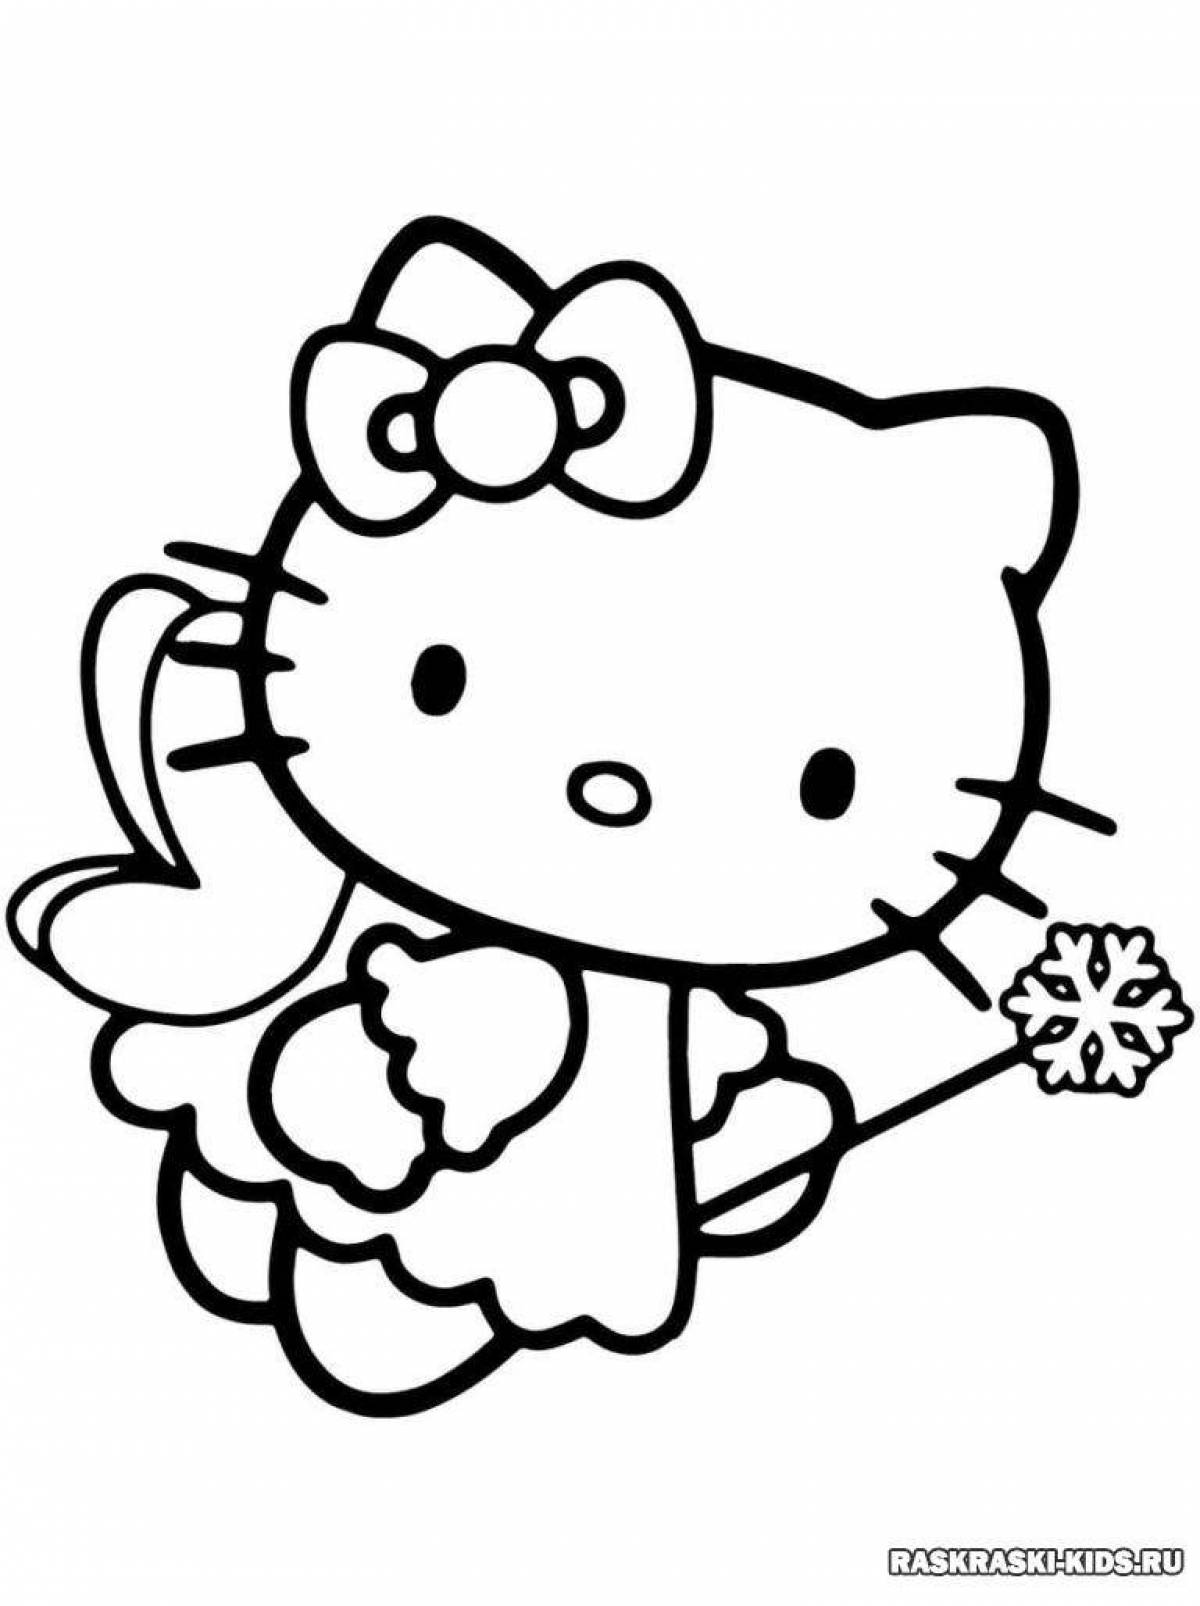 Fancy coloring hello kitty with heart